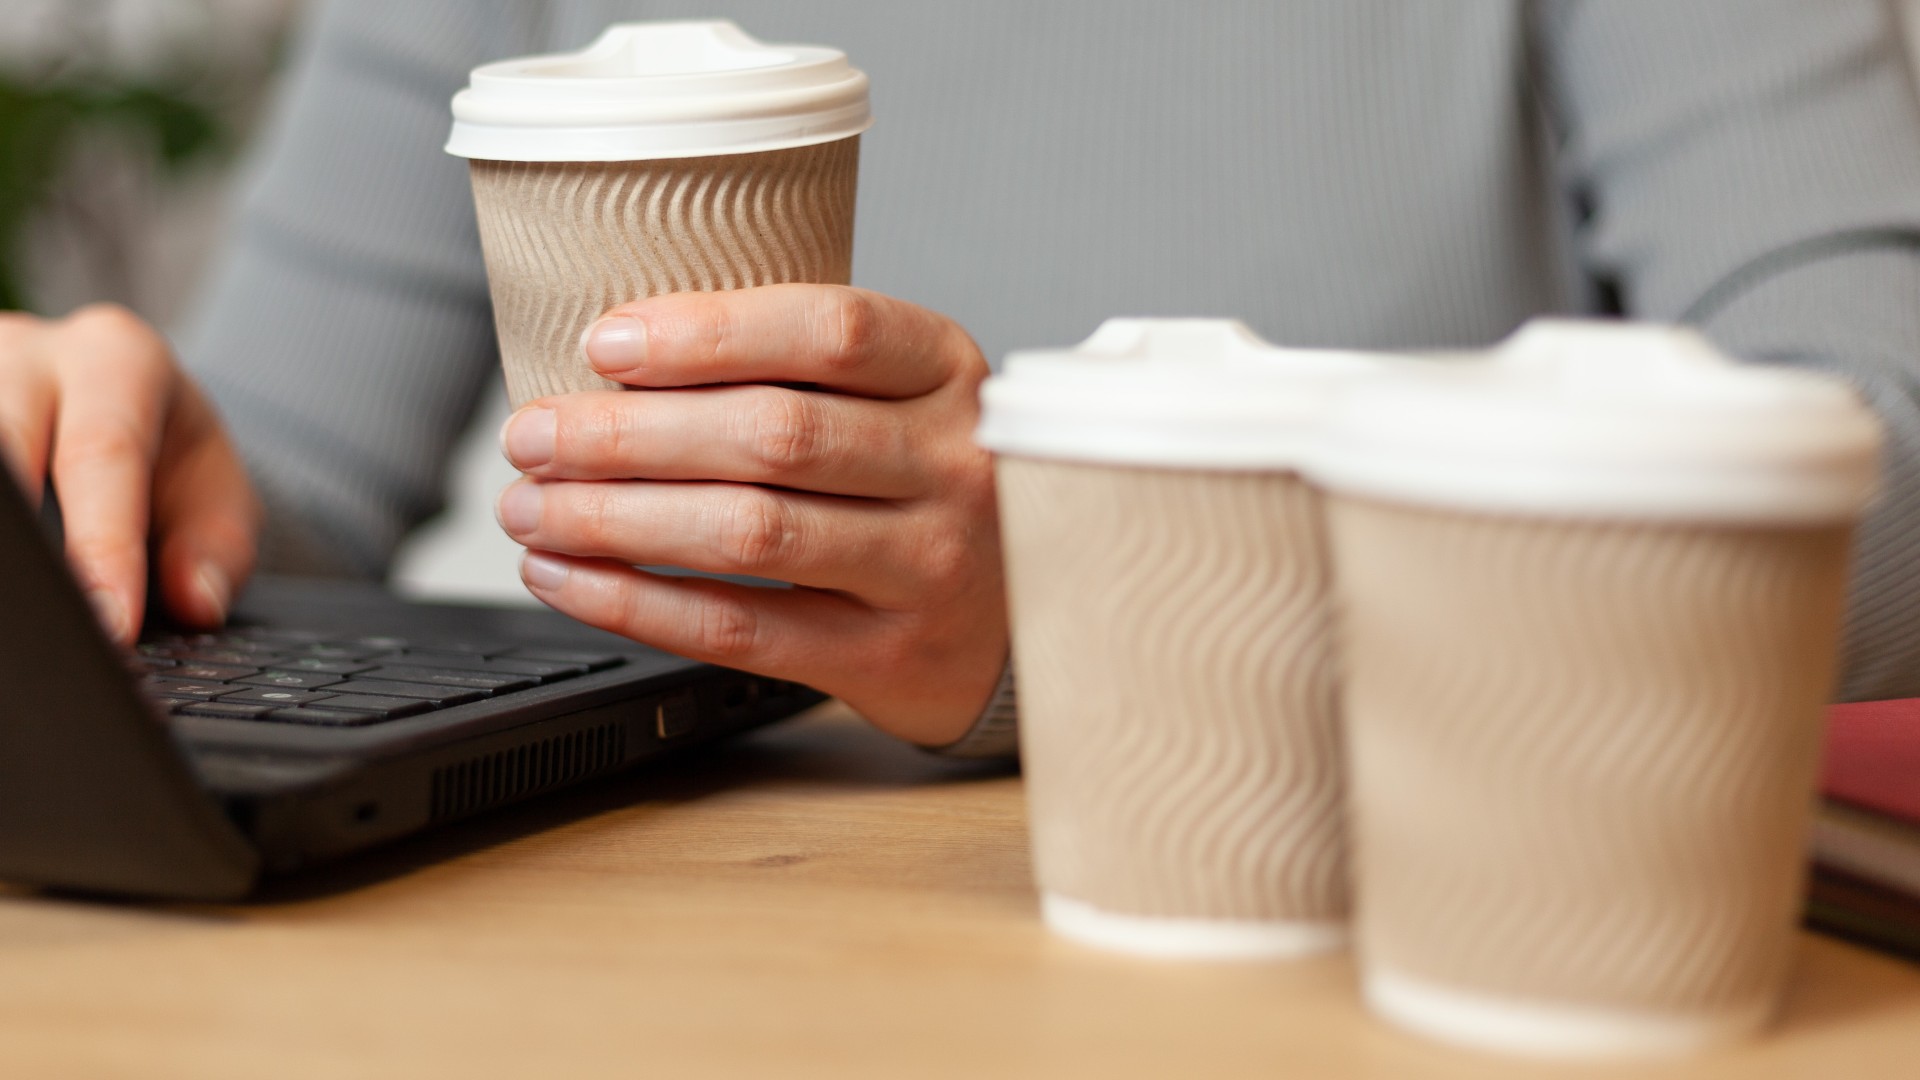 Close-up of a person working on a laptop and drinking coffee from a paper cup, with two more paper cups next to it.